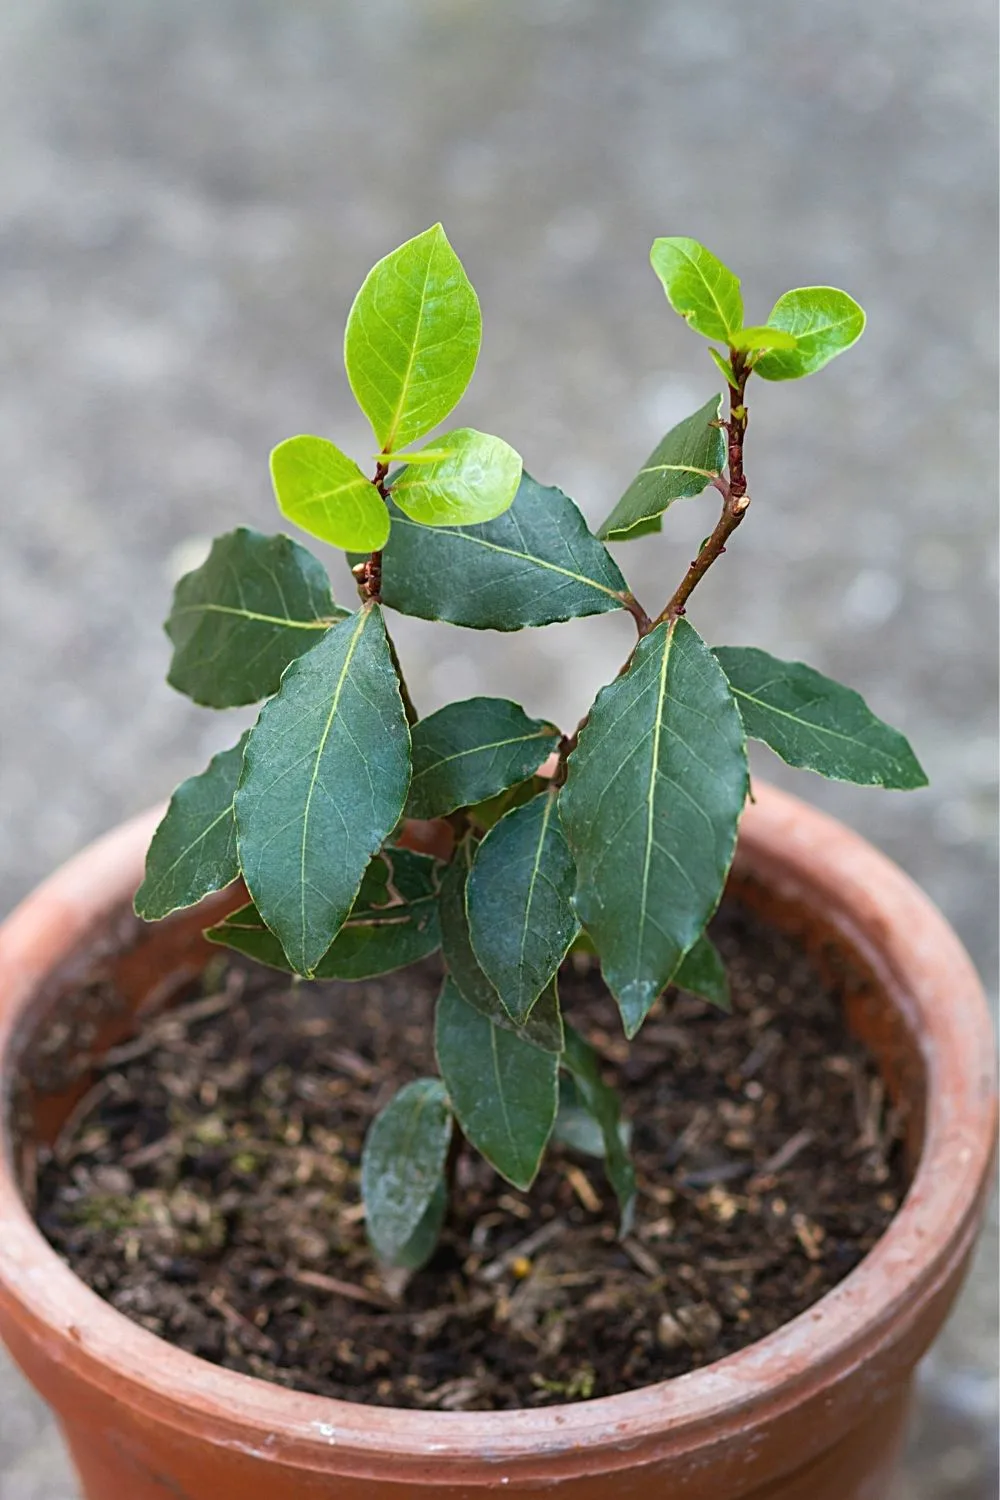 If you're looking to grow a plant into a large tree or shrub in your southeast facing garden, Bay Laurel is one choice you shouldn't miss